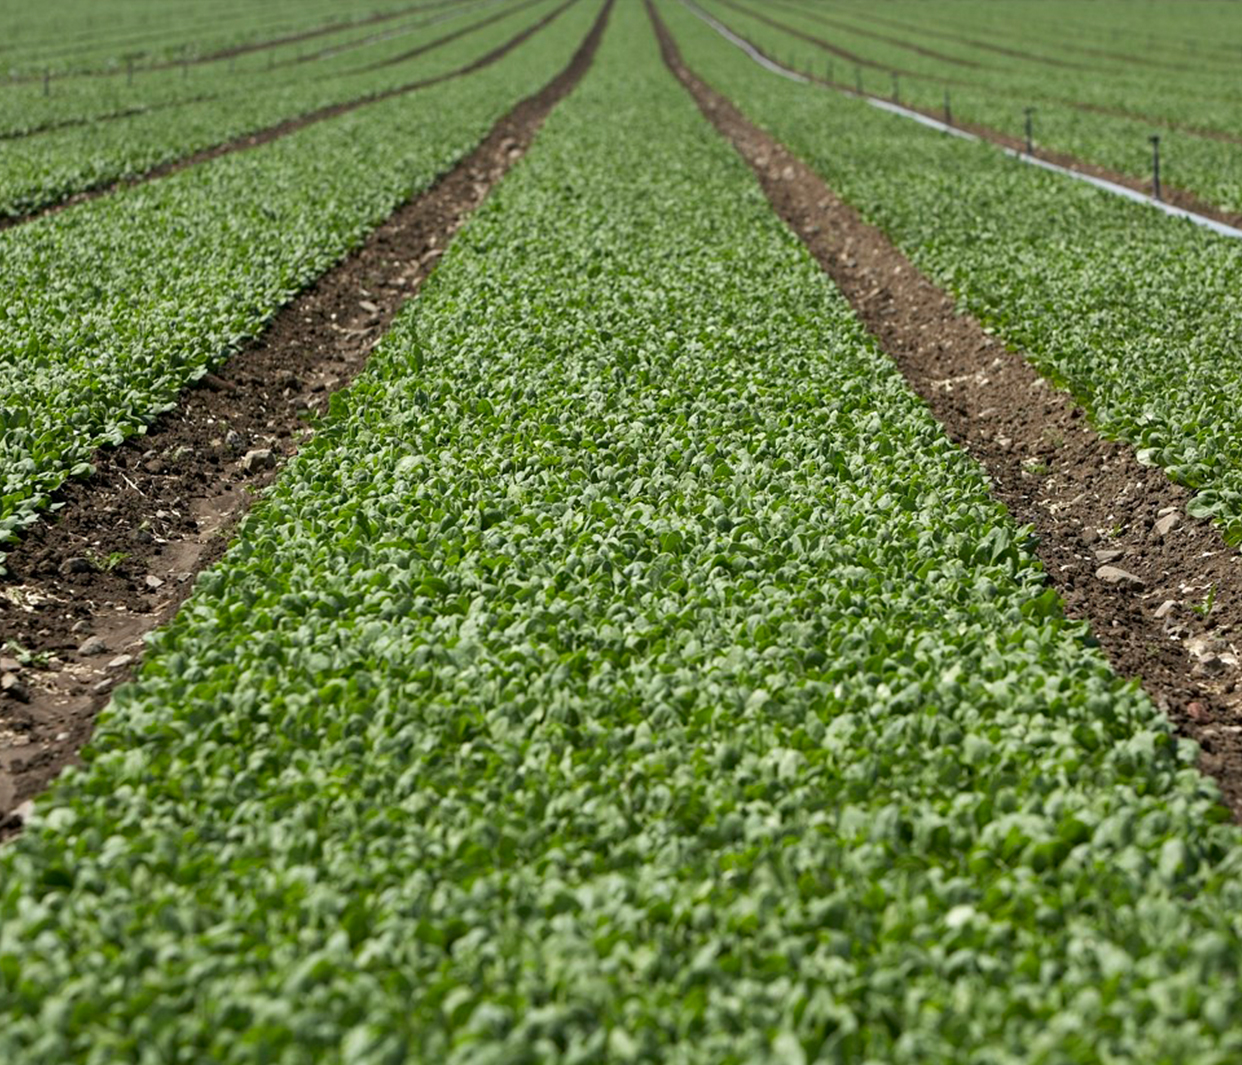 spinach growing in rows in a field